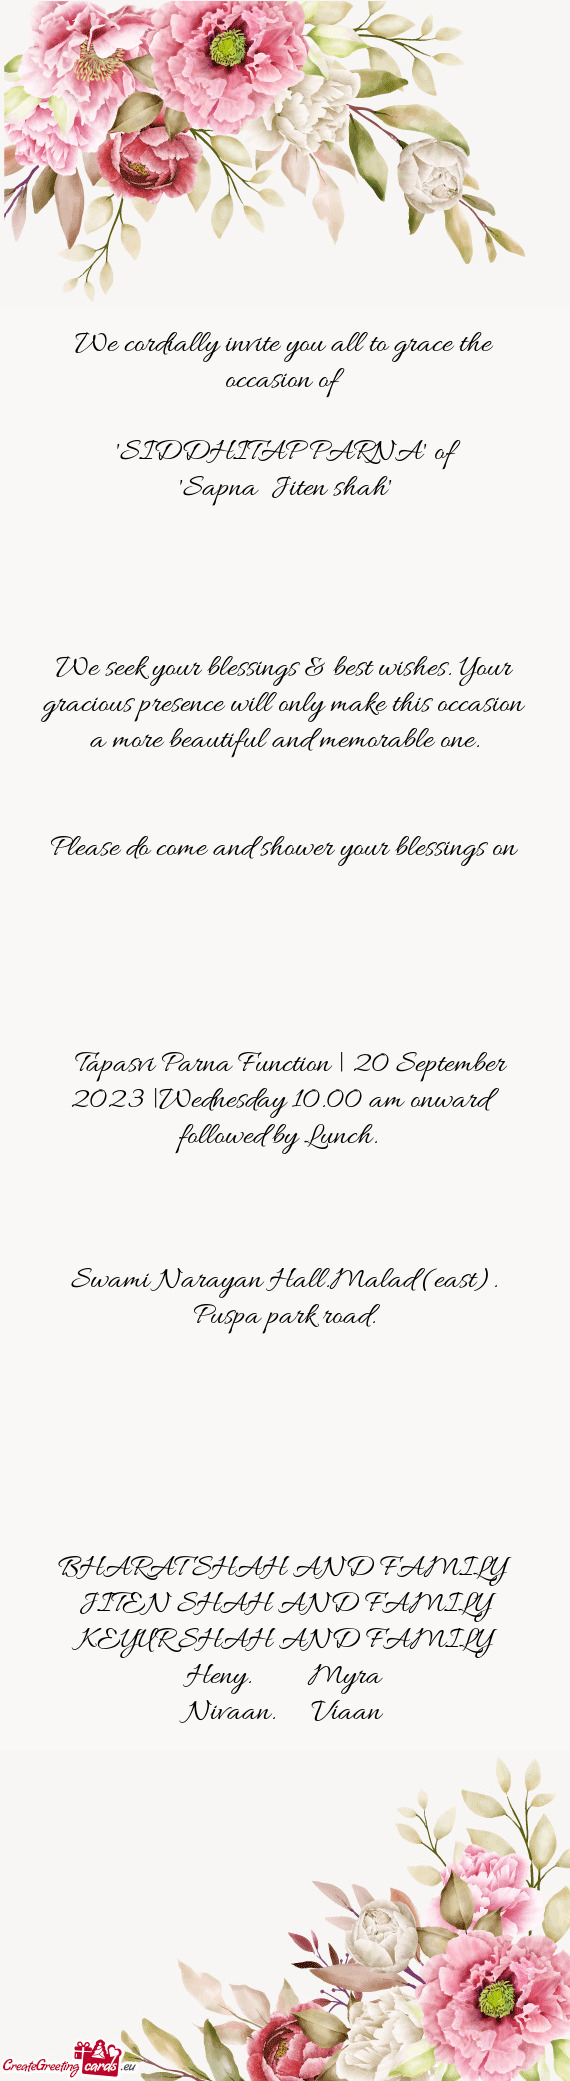 Tapasvi Parna Function | 20 September 2023 |Wednesday 10.00 am onward followed by Lunch